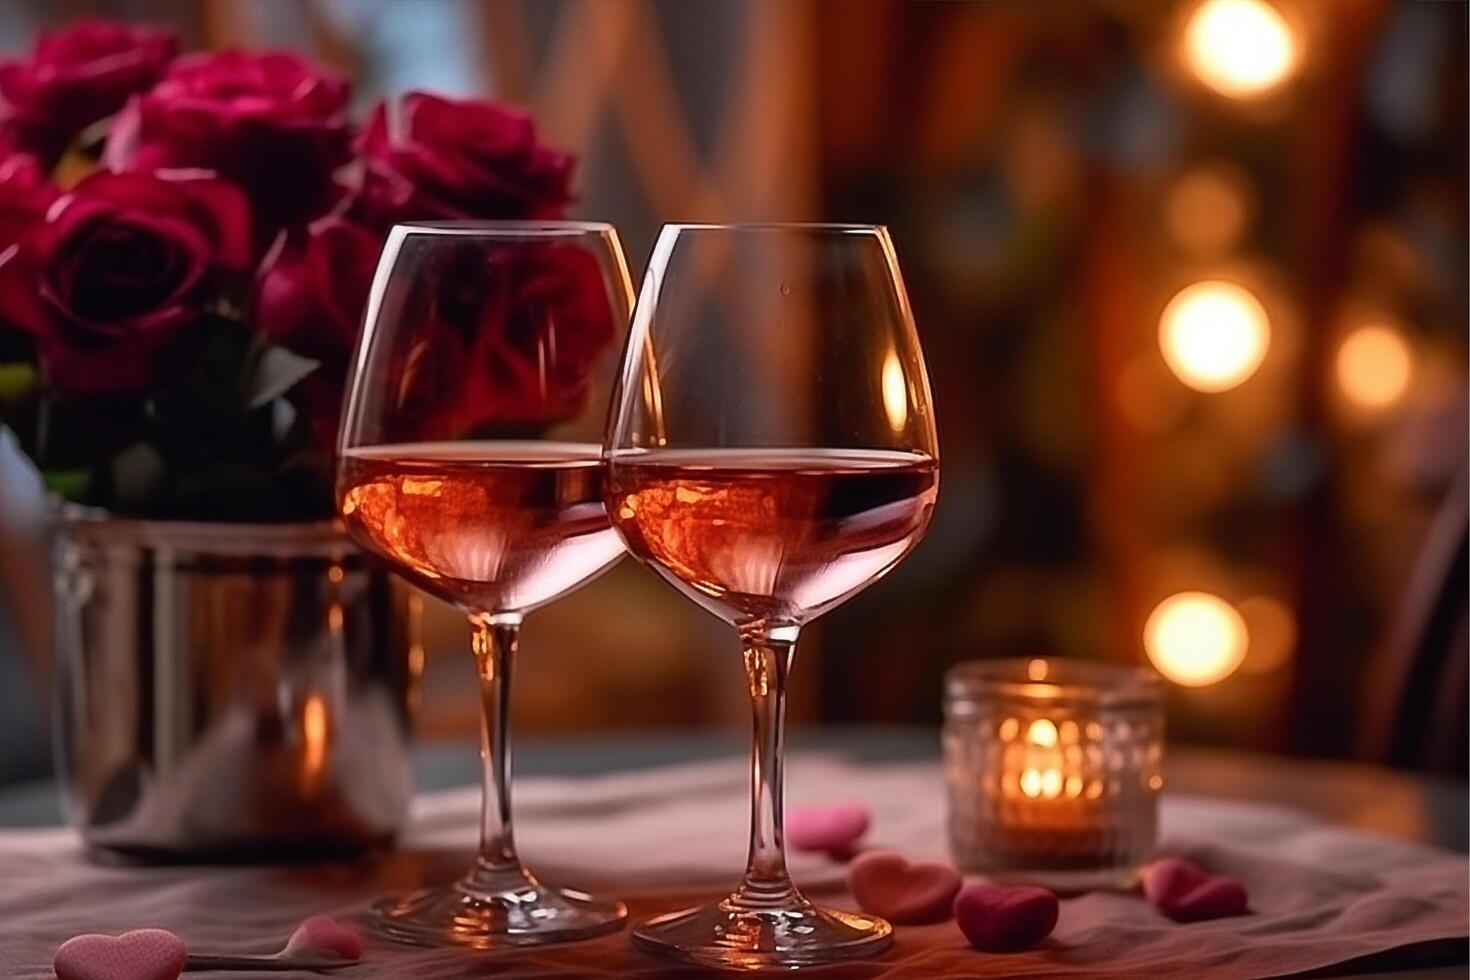 glasses of wine romantic dinner for valentine39s day concept, photo